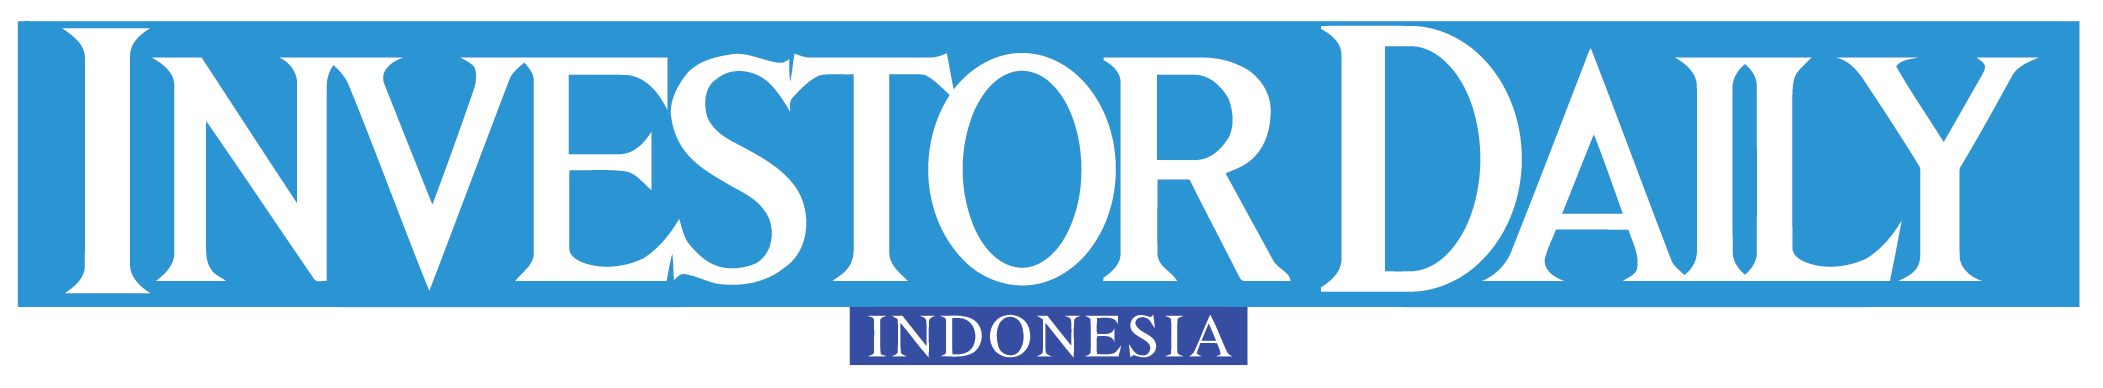 Media Logo 1 Investor Daily Indonesia.png